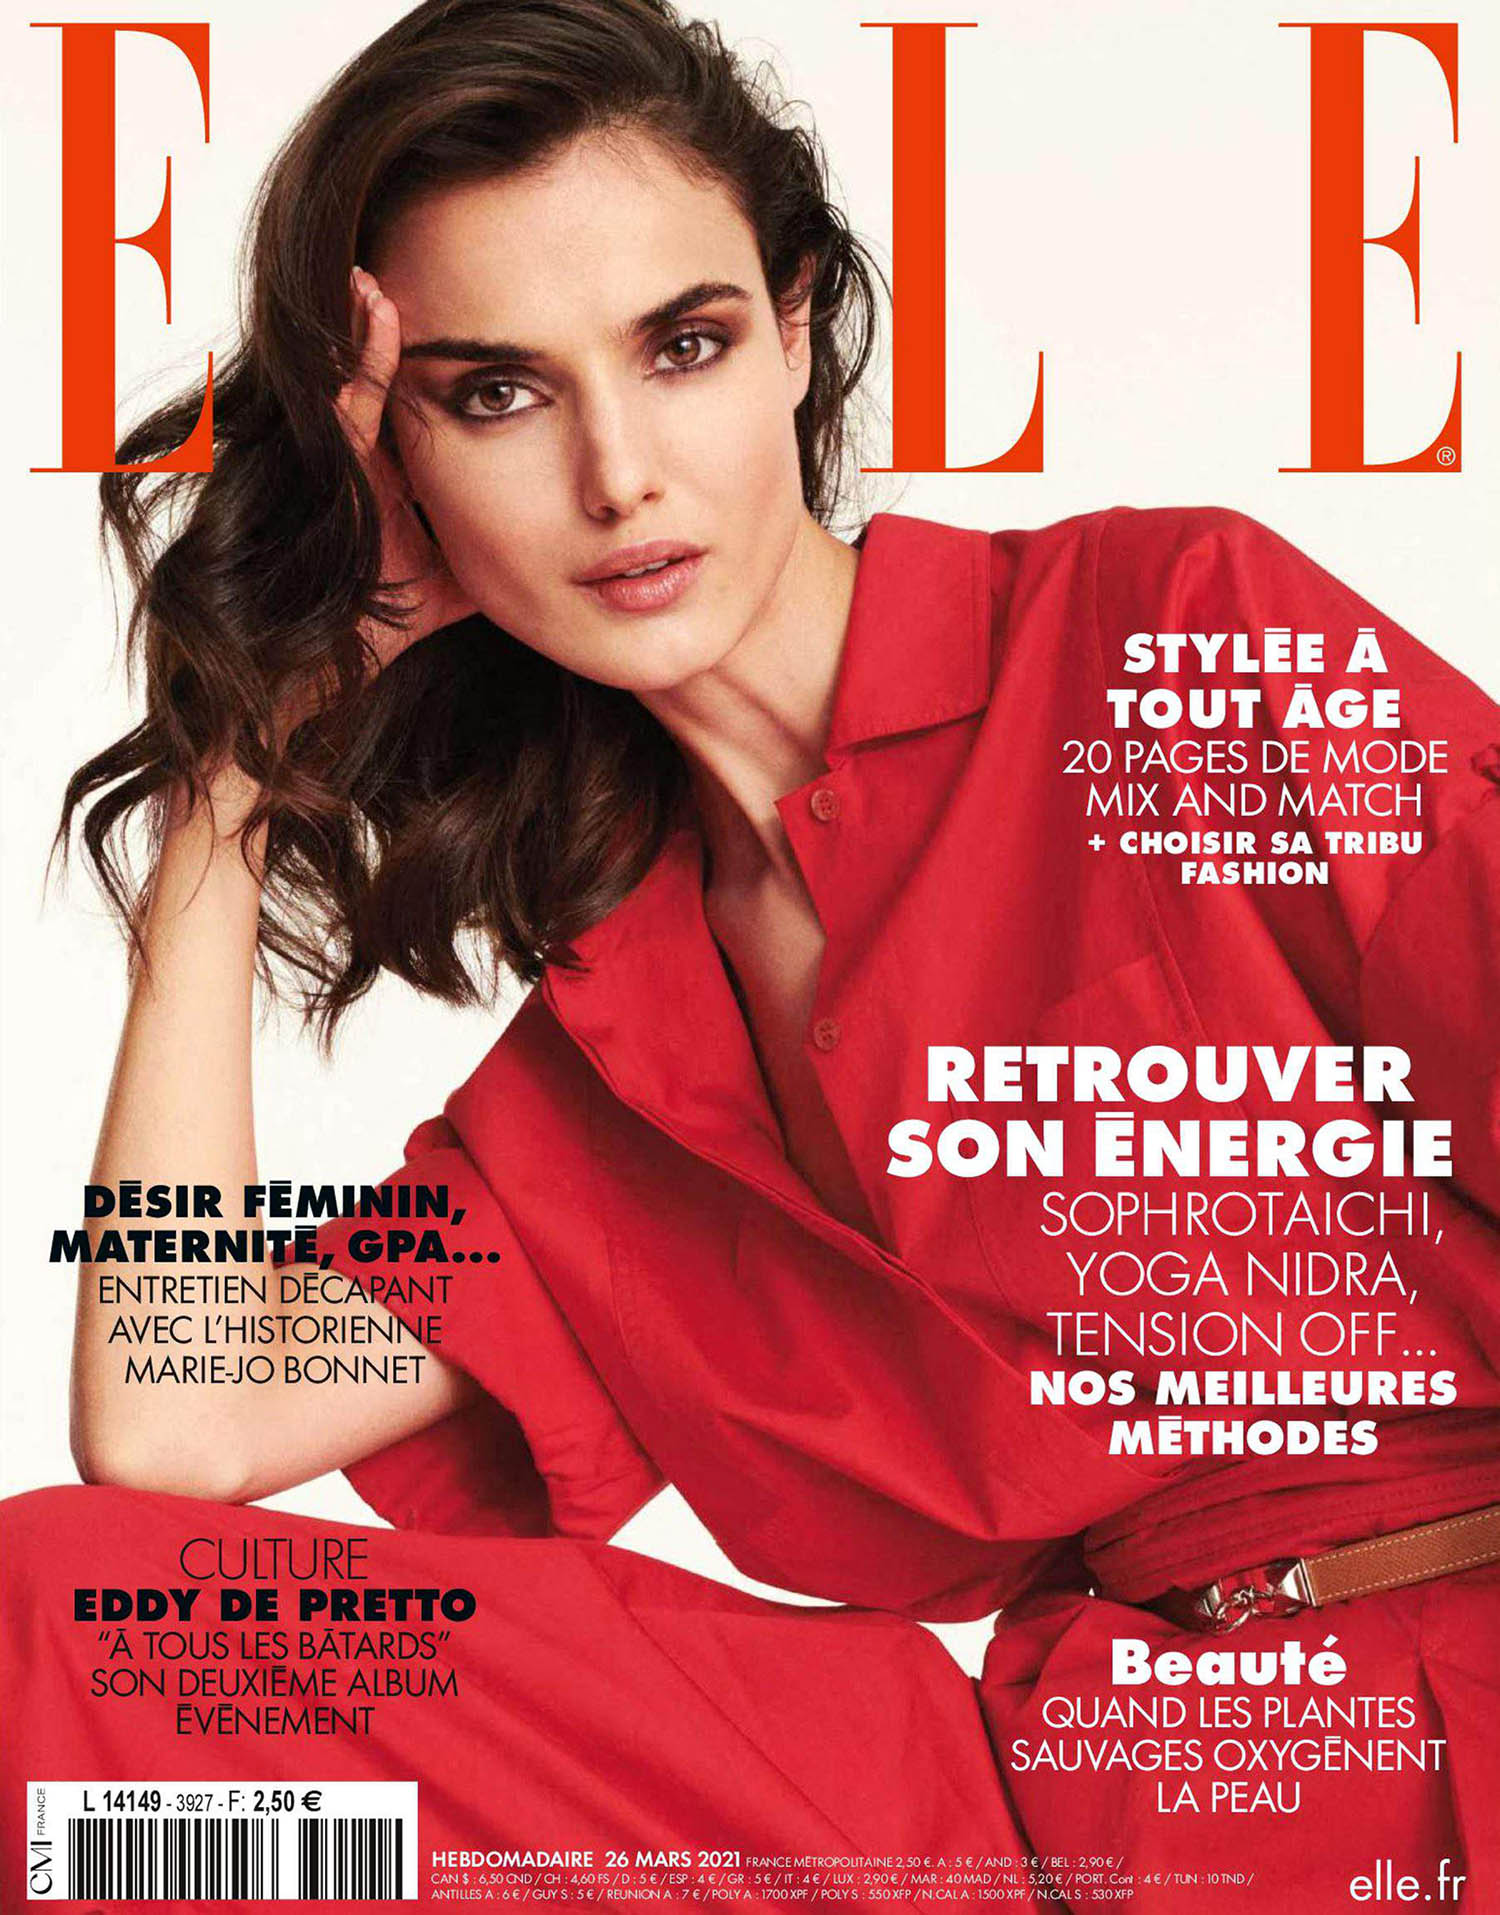 Blanca Padilla covers Elle France March 26th, 2021 by Philip Gay